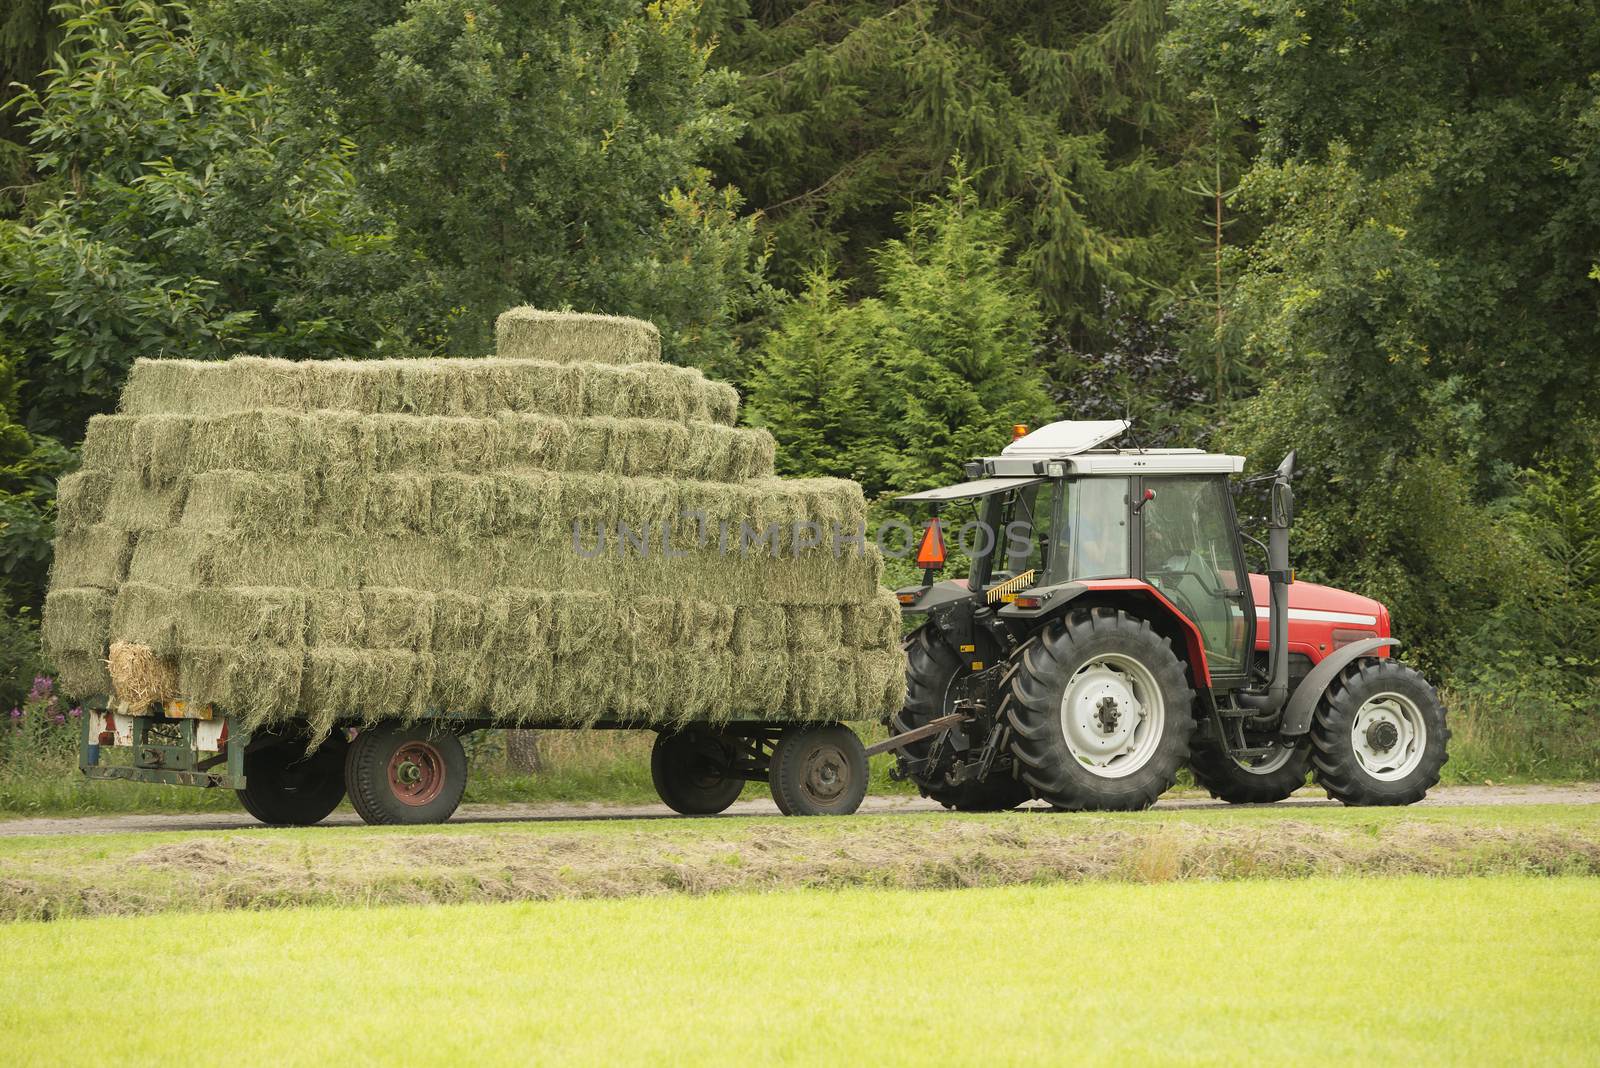 Transportation of bales of hay with a red tractor and flat car
